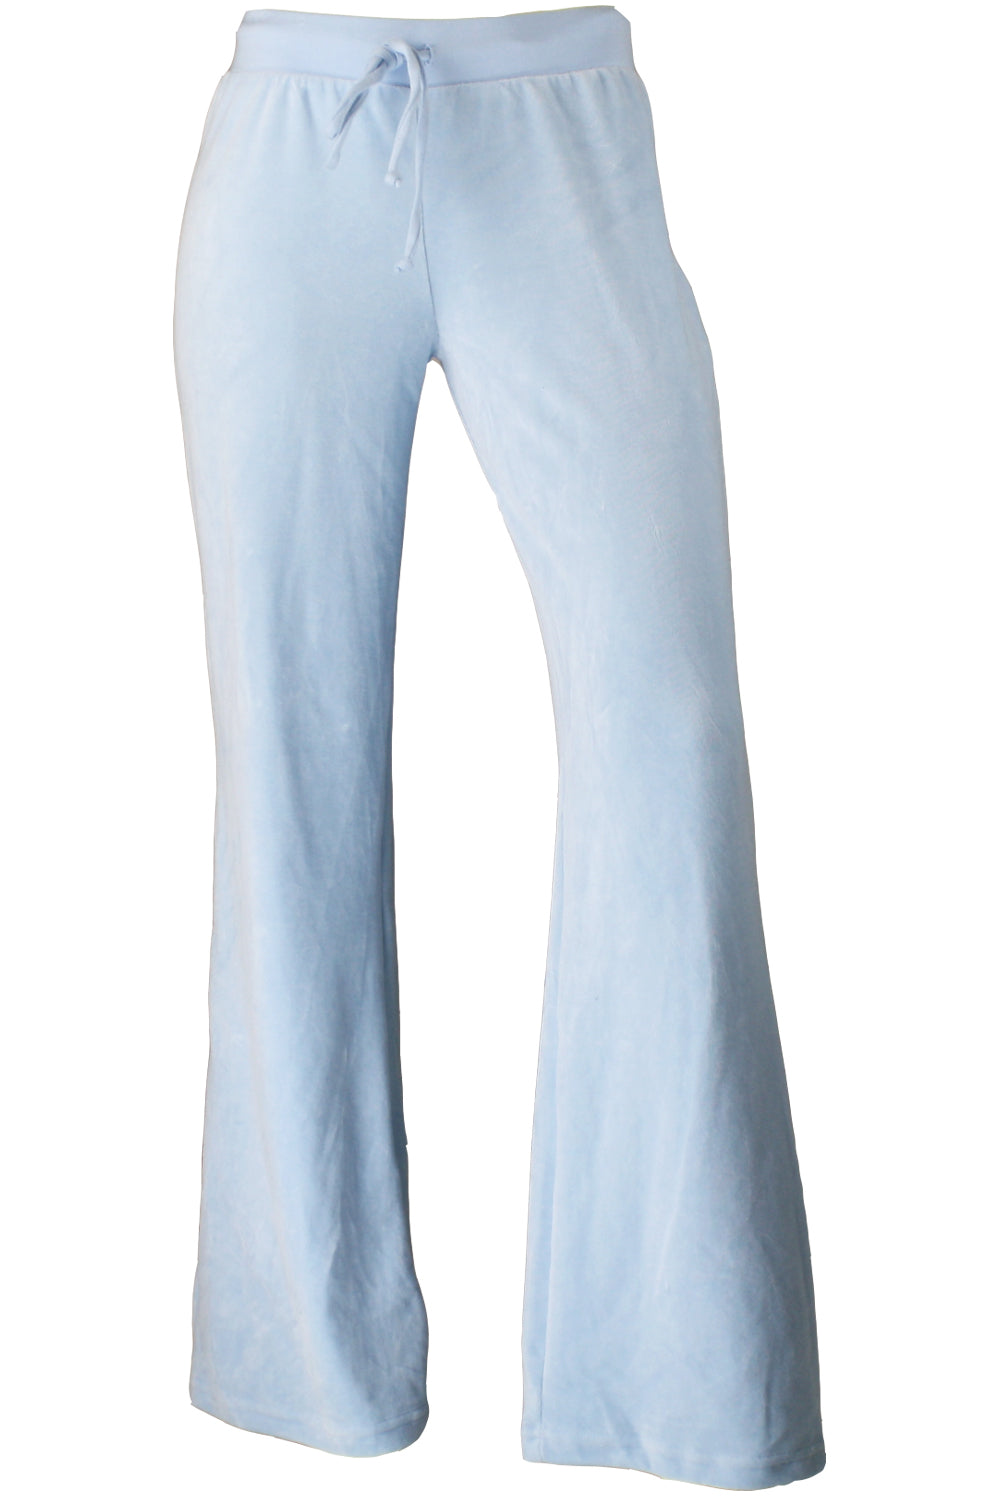 Buy INVICTUS Men Sky Blue Solid Slim Fit Formal Trousers  Trousers for Men  1745336  Myntra